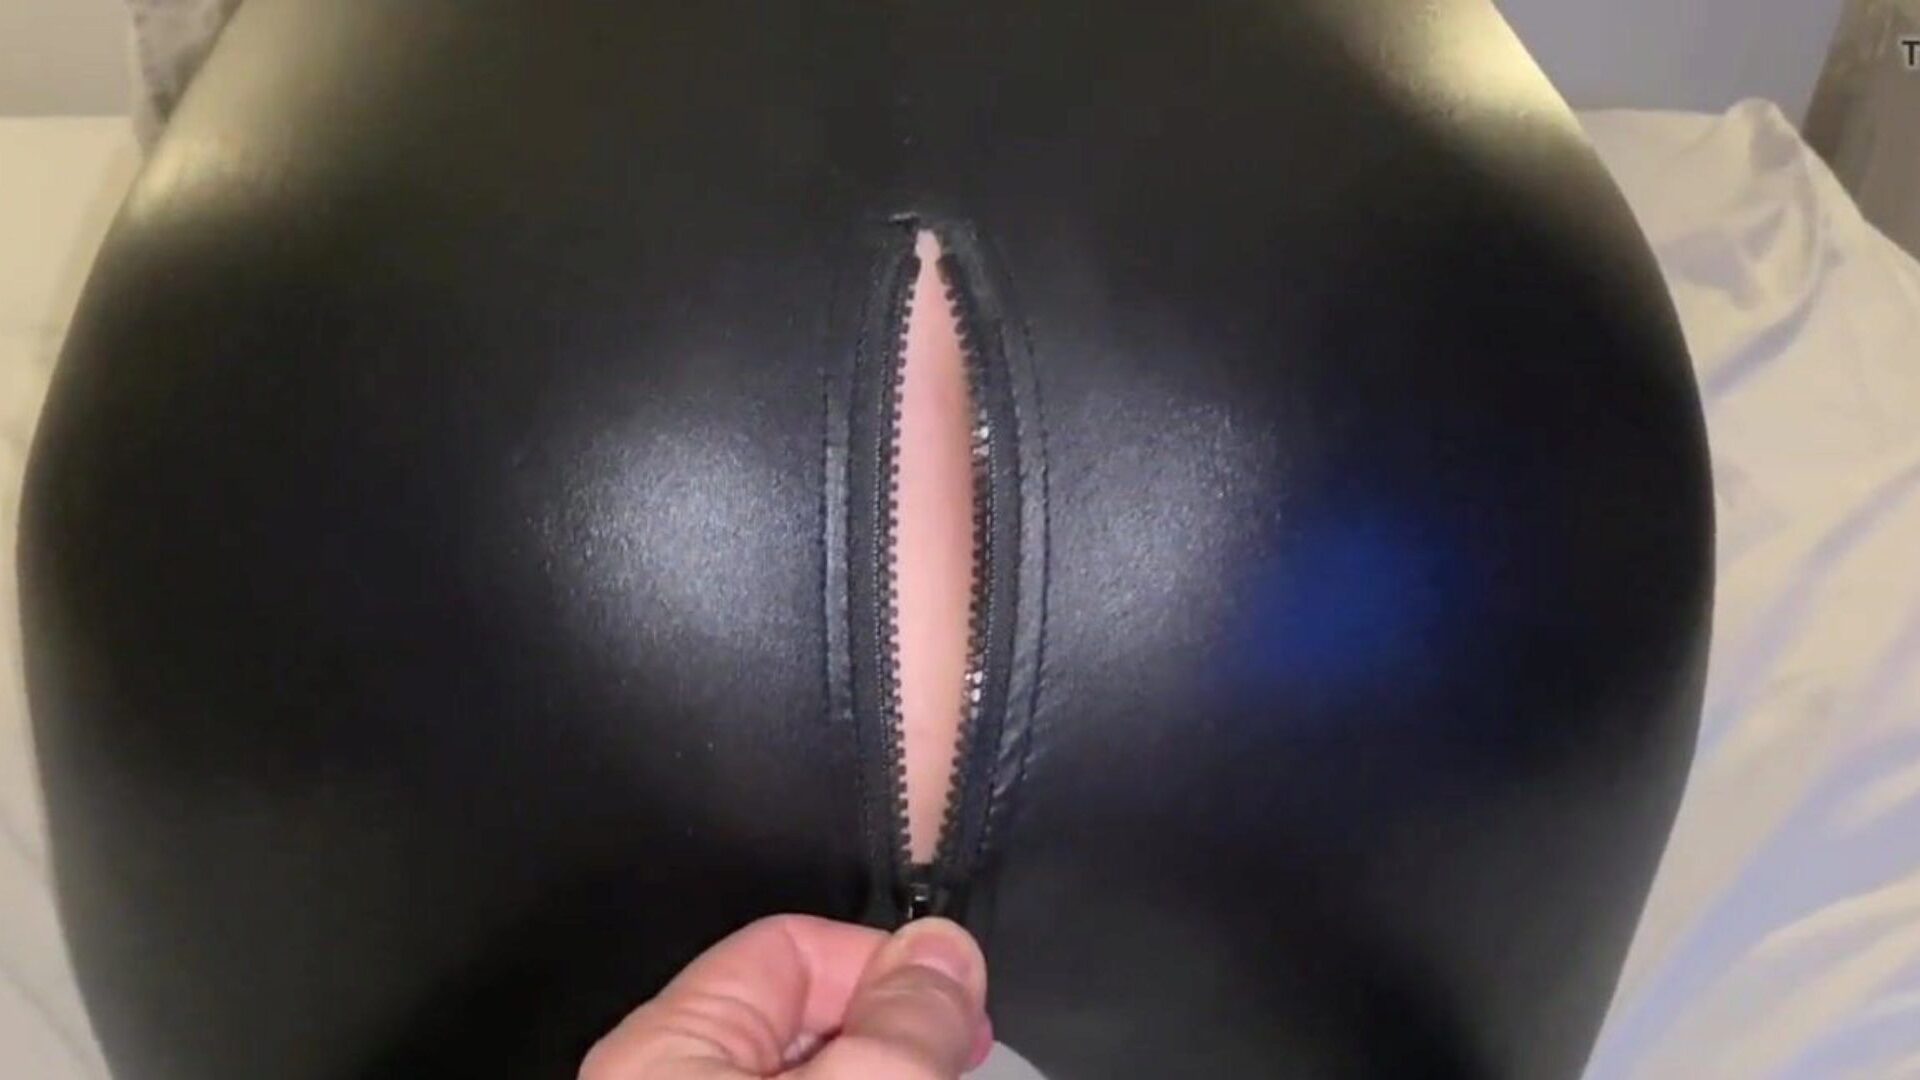 Uk mother I'd like to fuck in Catsuit in Perfect Buttplug Reveal: Free Porn 57 Watch Uk mother I'd like to fuck in Catsuit in Perfect Buttplug Reveal episode on xHamster - the ultimate selection of free British Ipad Perfect HD gonzo porn tube videos